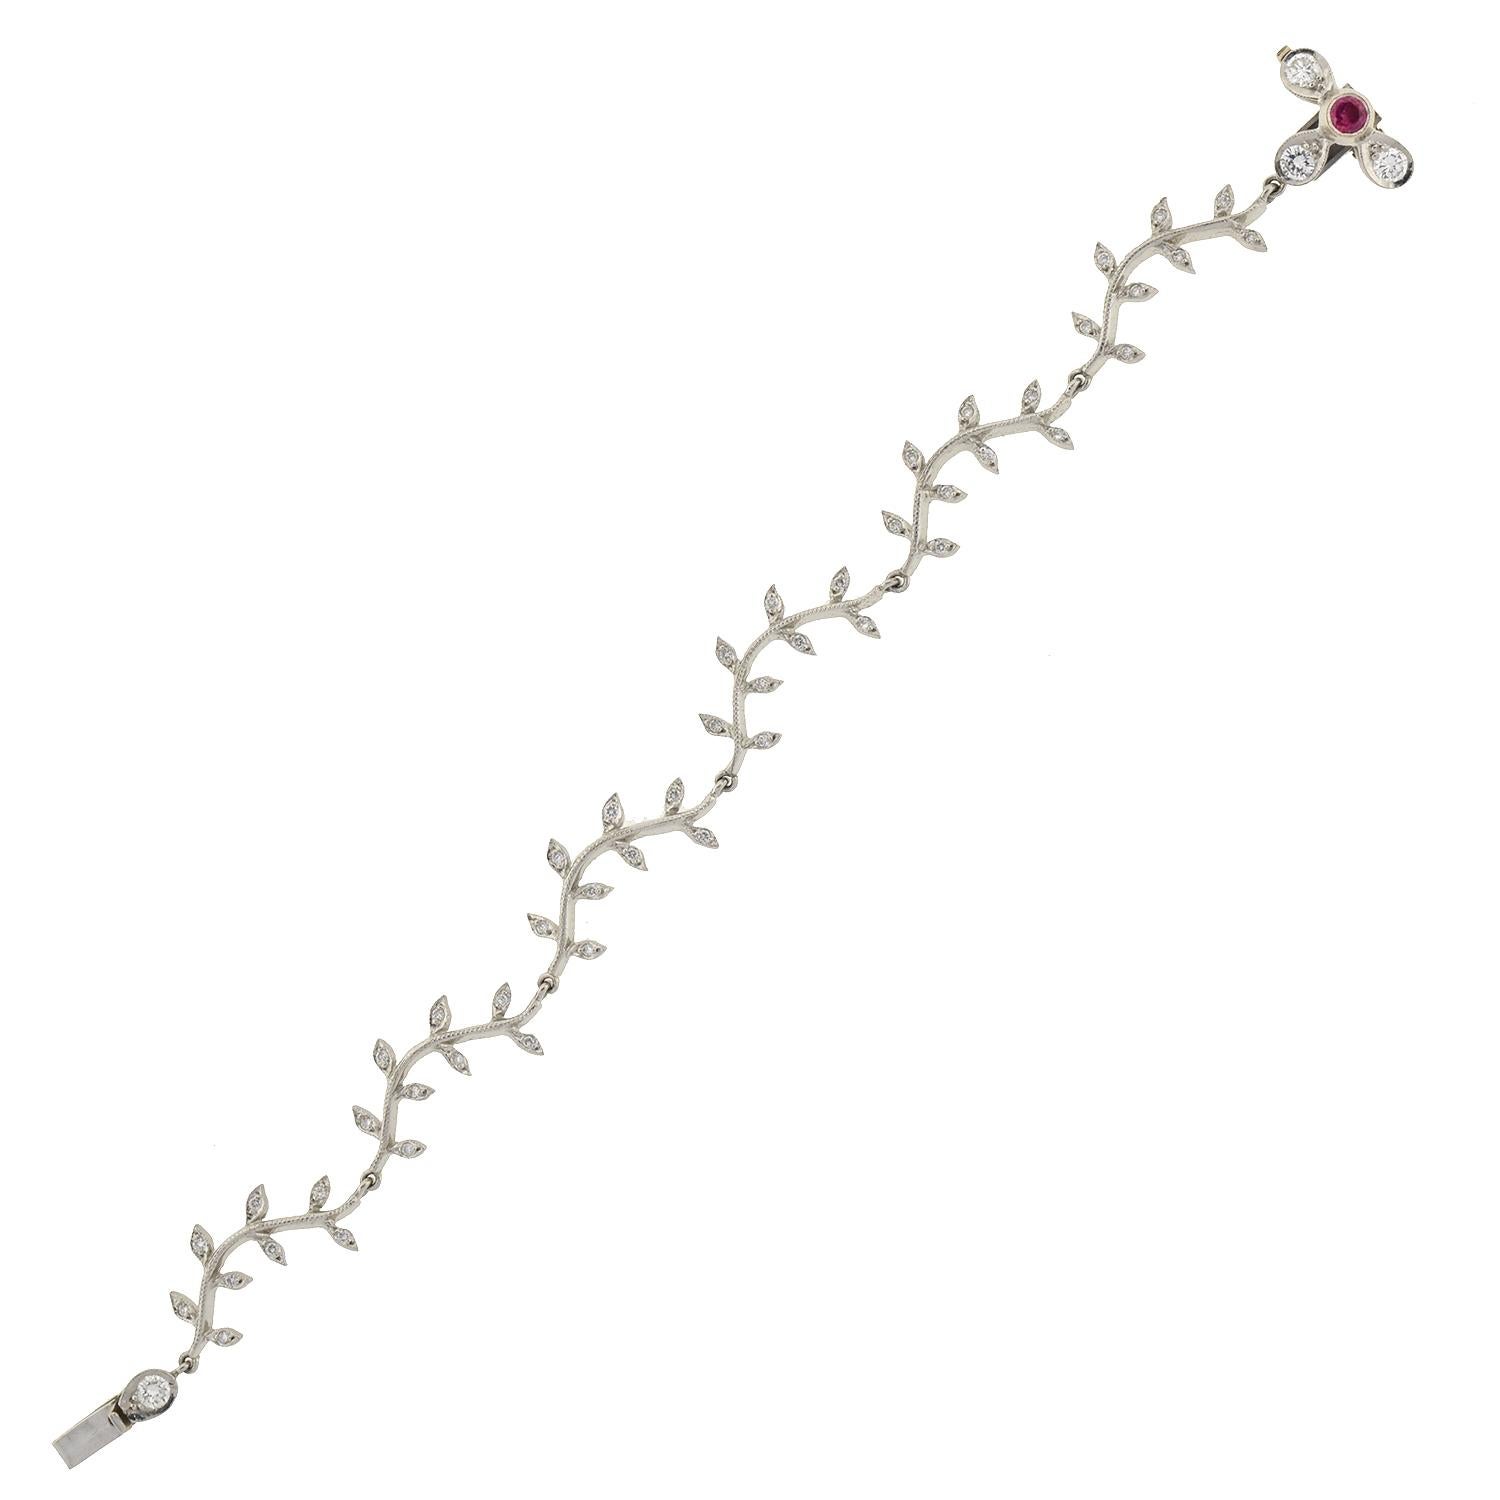 A contemporary diamond and ruby bracelet from legendary maker Cathy Waterman! This lovely piece is made of platinum and has a feminine flower and vine design. The bracelet features 6 long branch-like links, each encrusted with sparkling diamonds